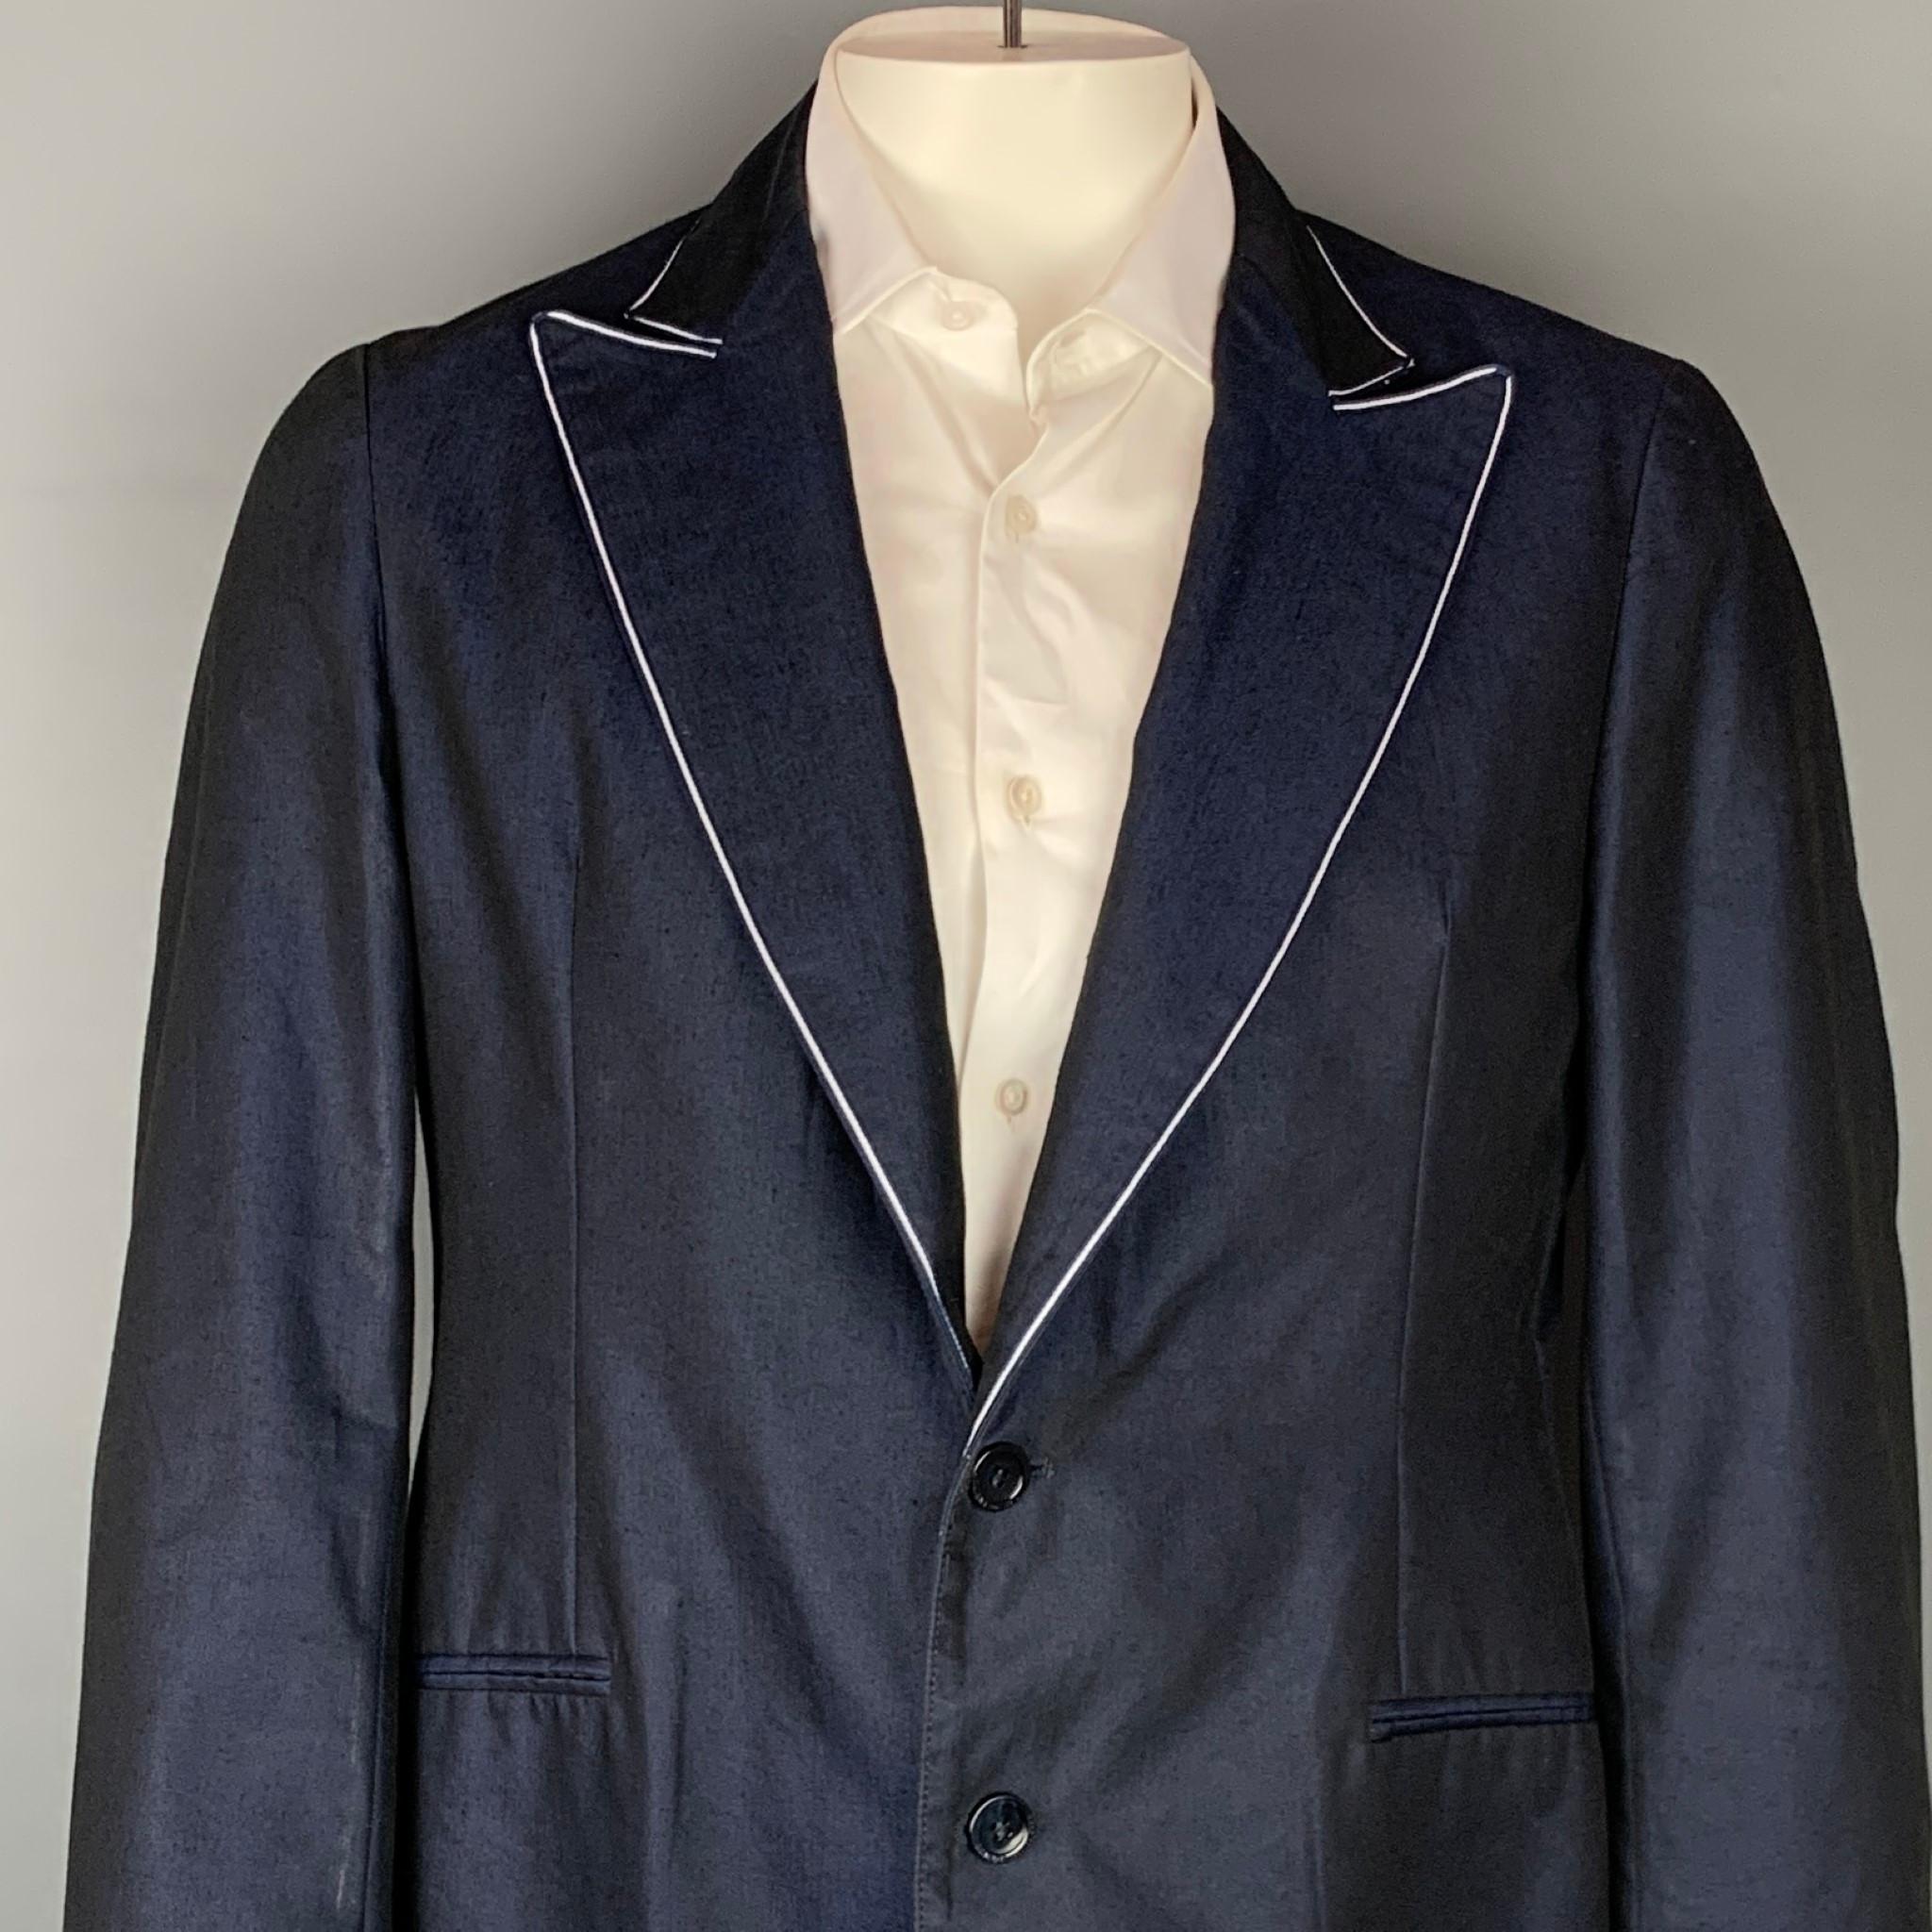 ARMANI COLLEZIONI sport coat comes in a navy & & white linen / polyester with a half piping liner featuring a peak lapel, slit pockets, and a two button closure. Made in Romania.

Very Good Pre-Owned Condition.
Marked: 42

Measurements:

Shoulder: